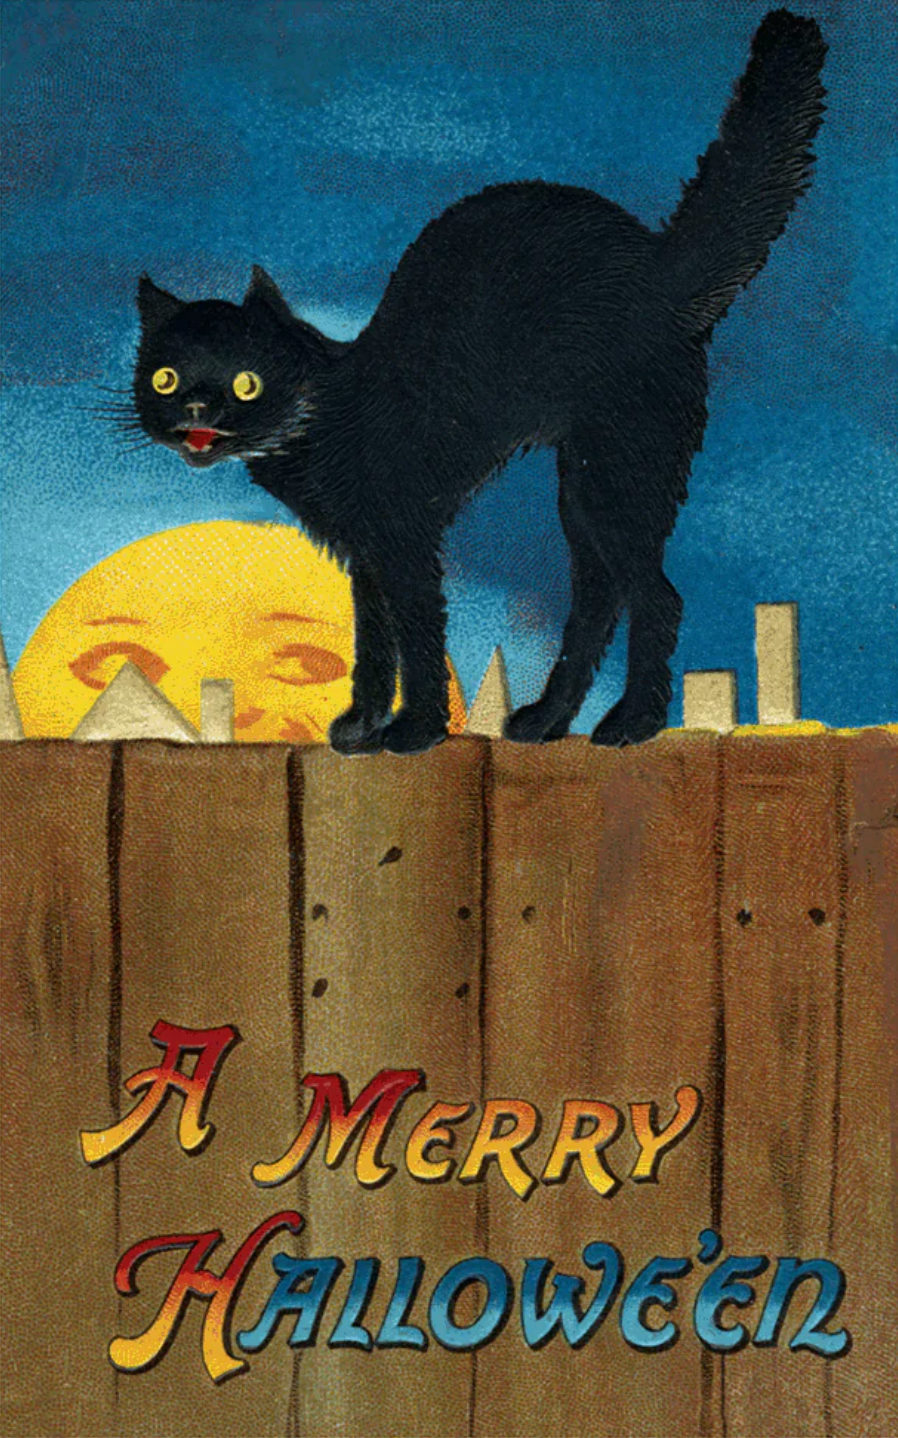 Black Cat on a Fence - Halloween Greeting Card